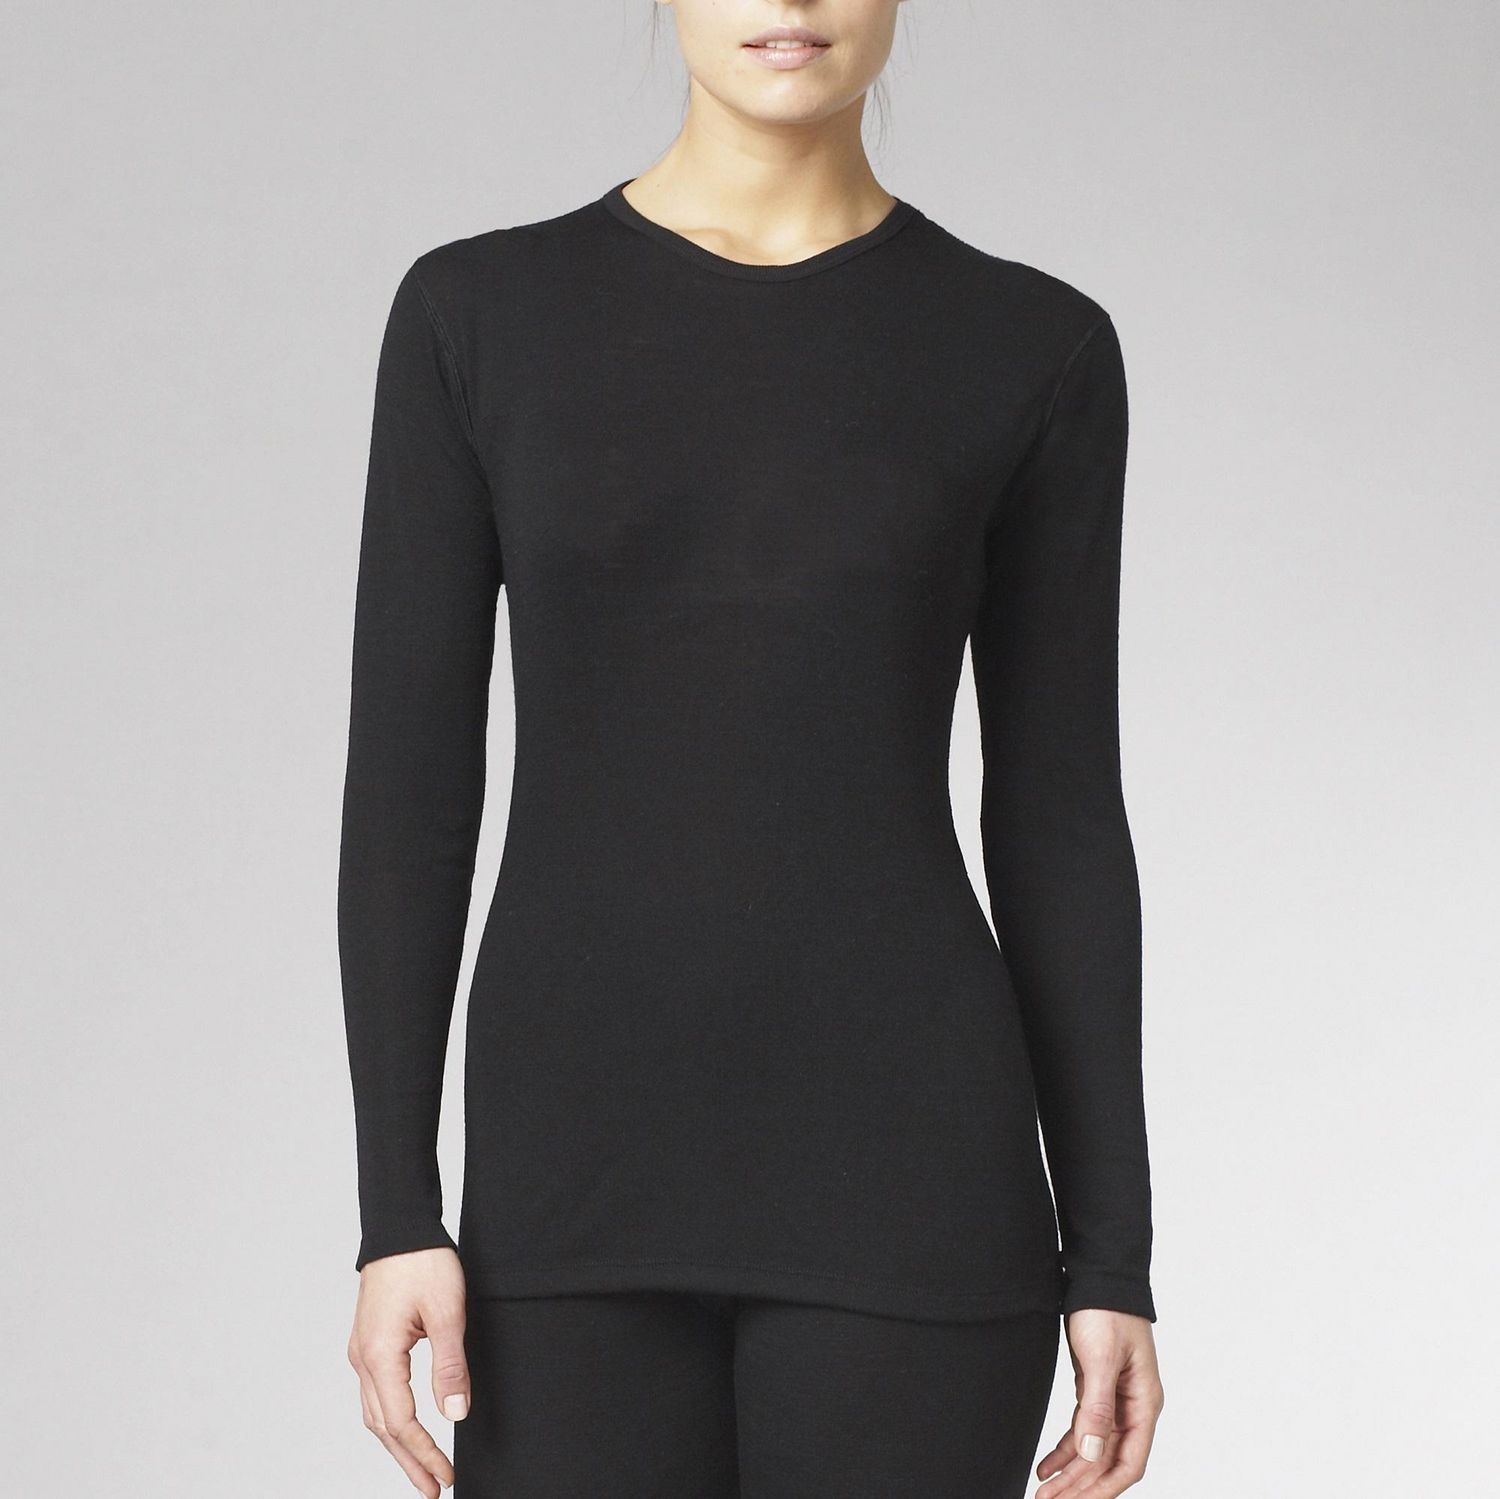 Stanfield's Essentials Women's 2 Layer Thermal Base Layer Long Sleeve Top